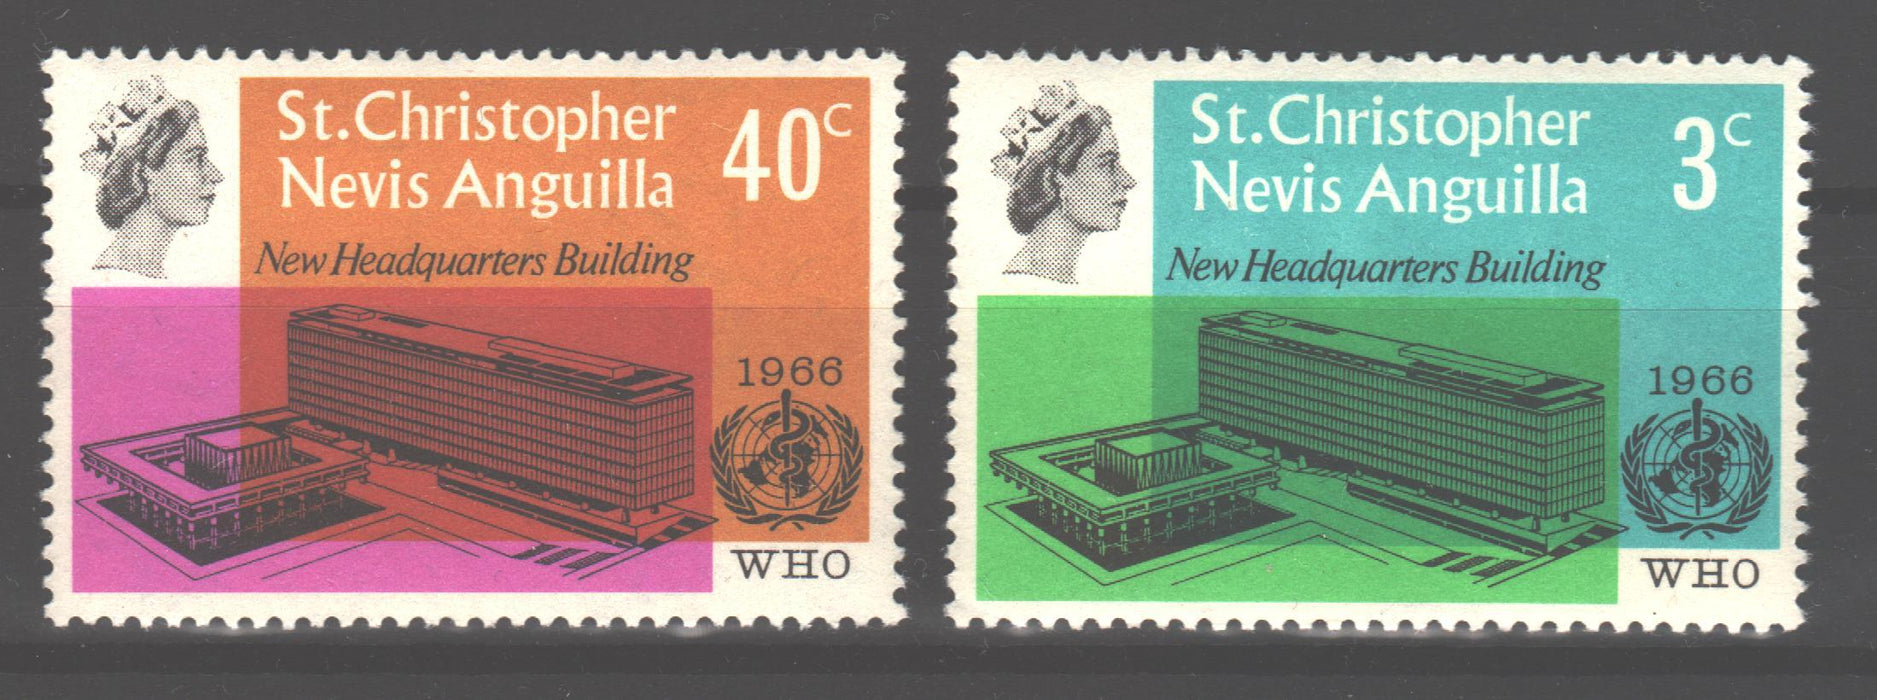 St. Cristopher Nevis Anguilla 1966 WHO Headquarters Issue Scott # c.v. $ - (TIP A)-Stamps Mall